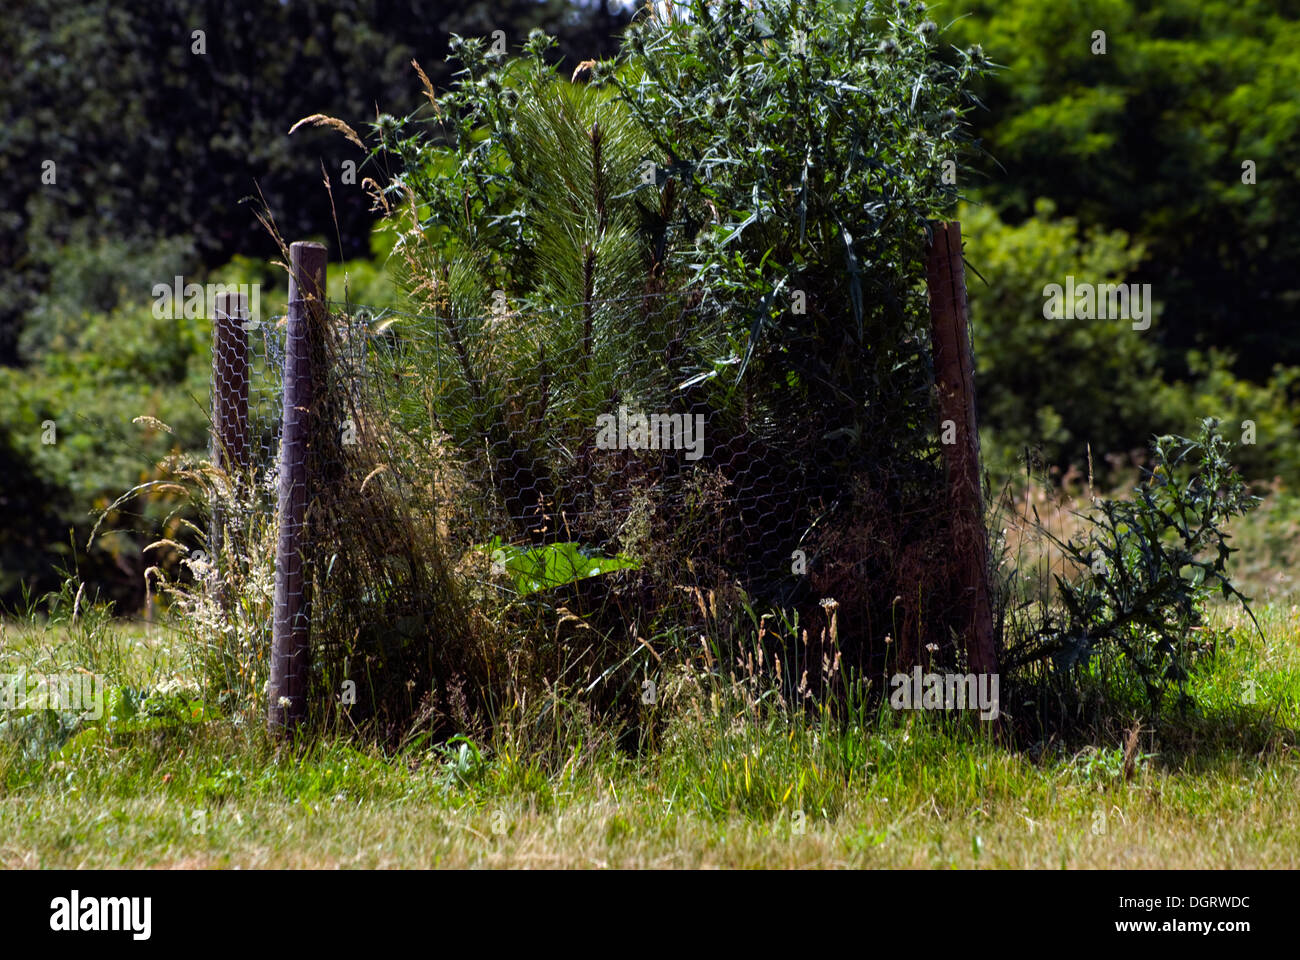 mesh tree guards for protecting young trees from rabbits Stock Photo